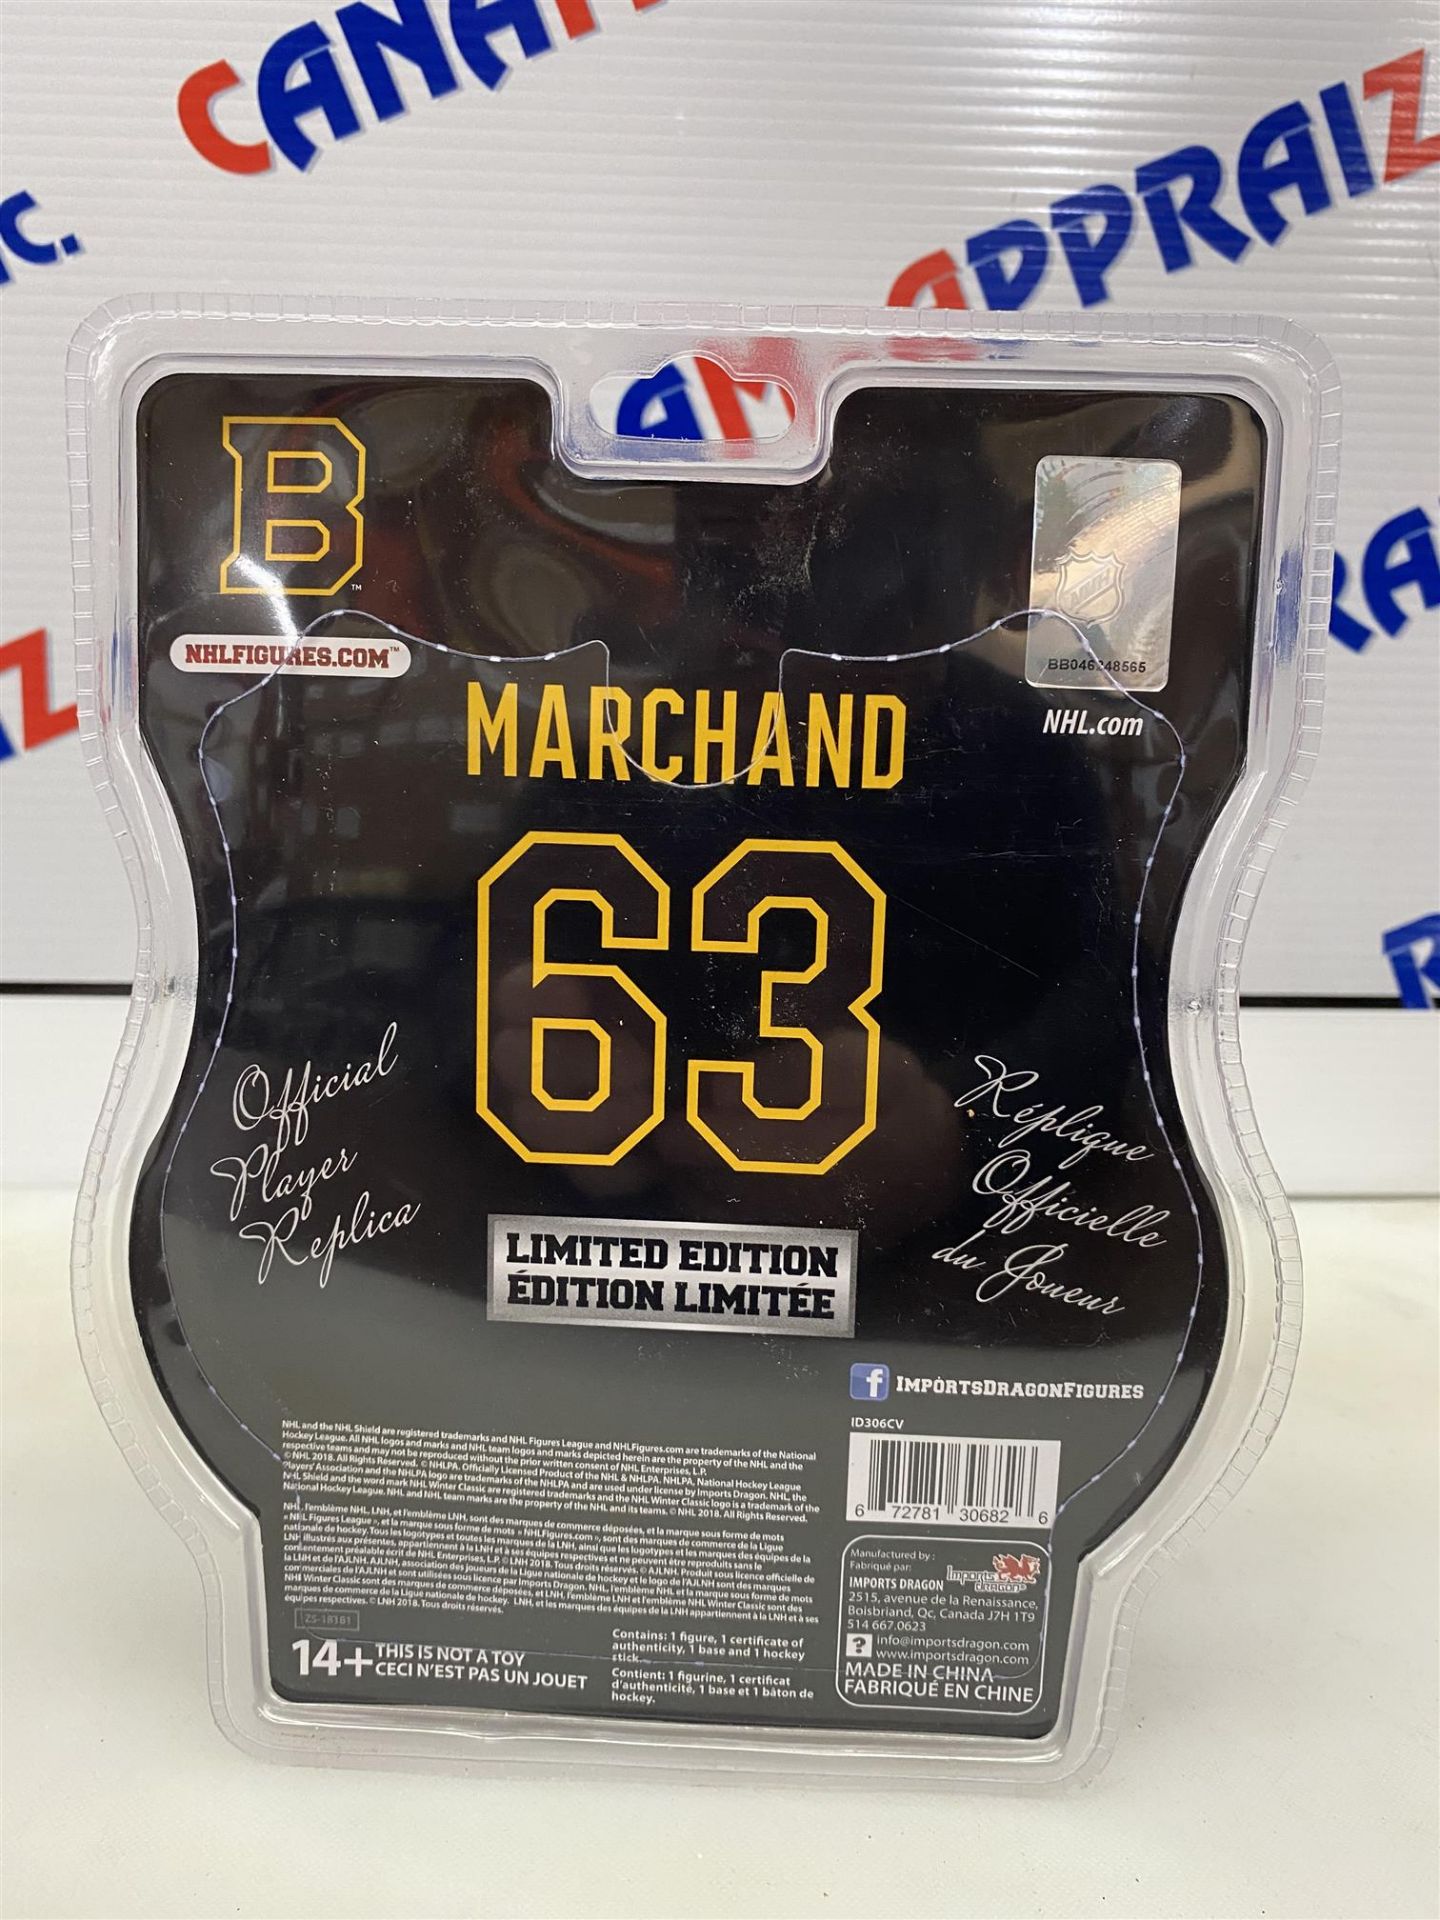 Limited Edition NHL-pa- (Player Figure) BOSTON BRUINS - MARCHAND 63 - Image 2 of 2